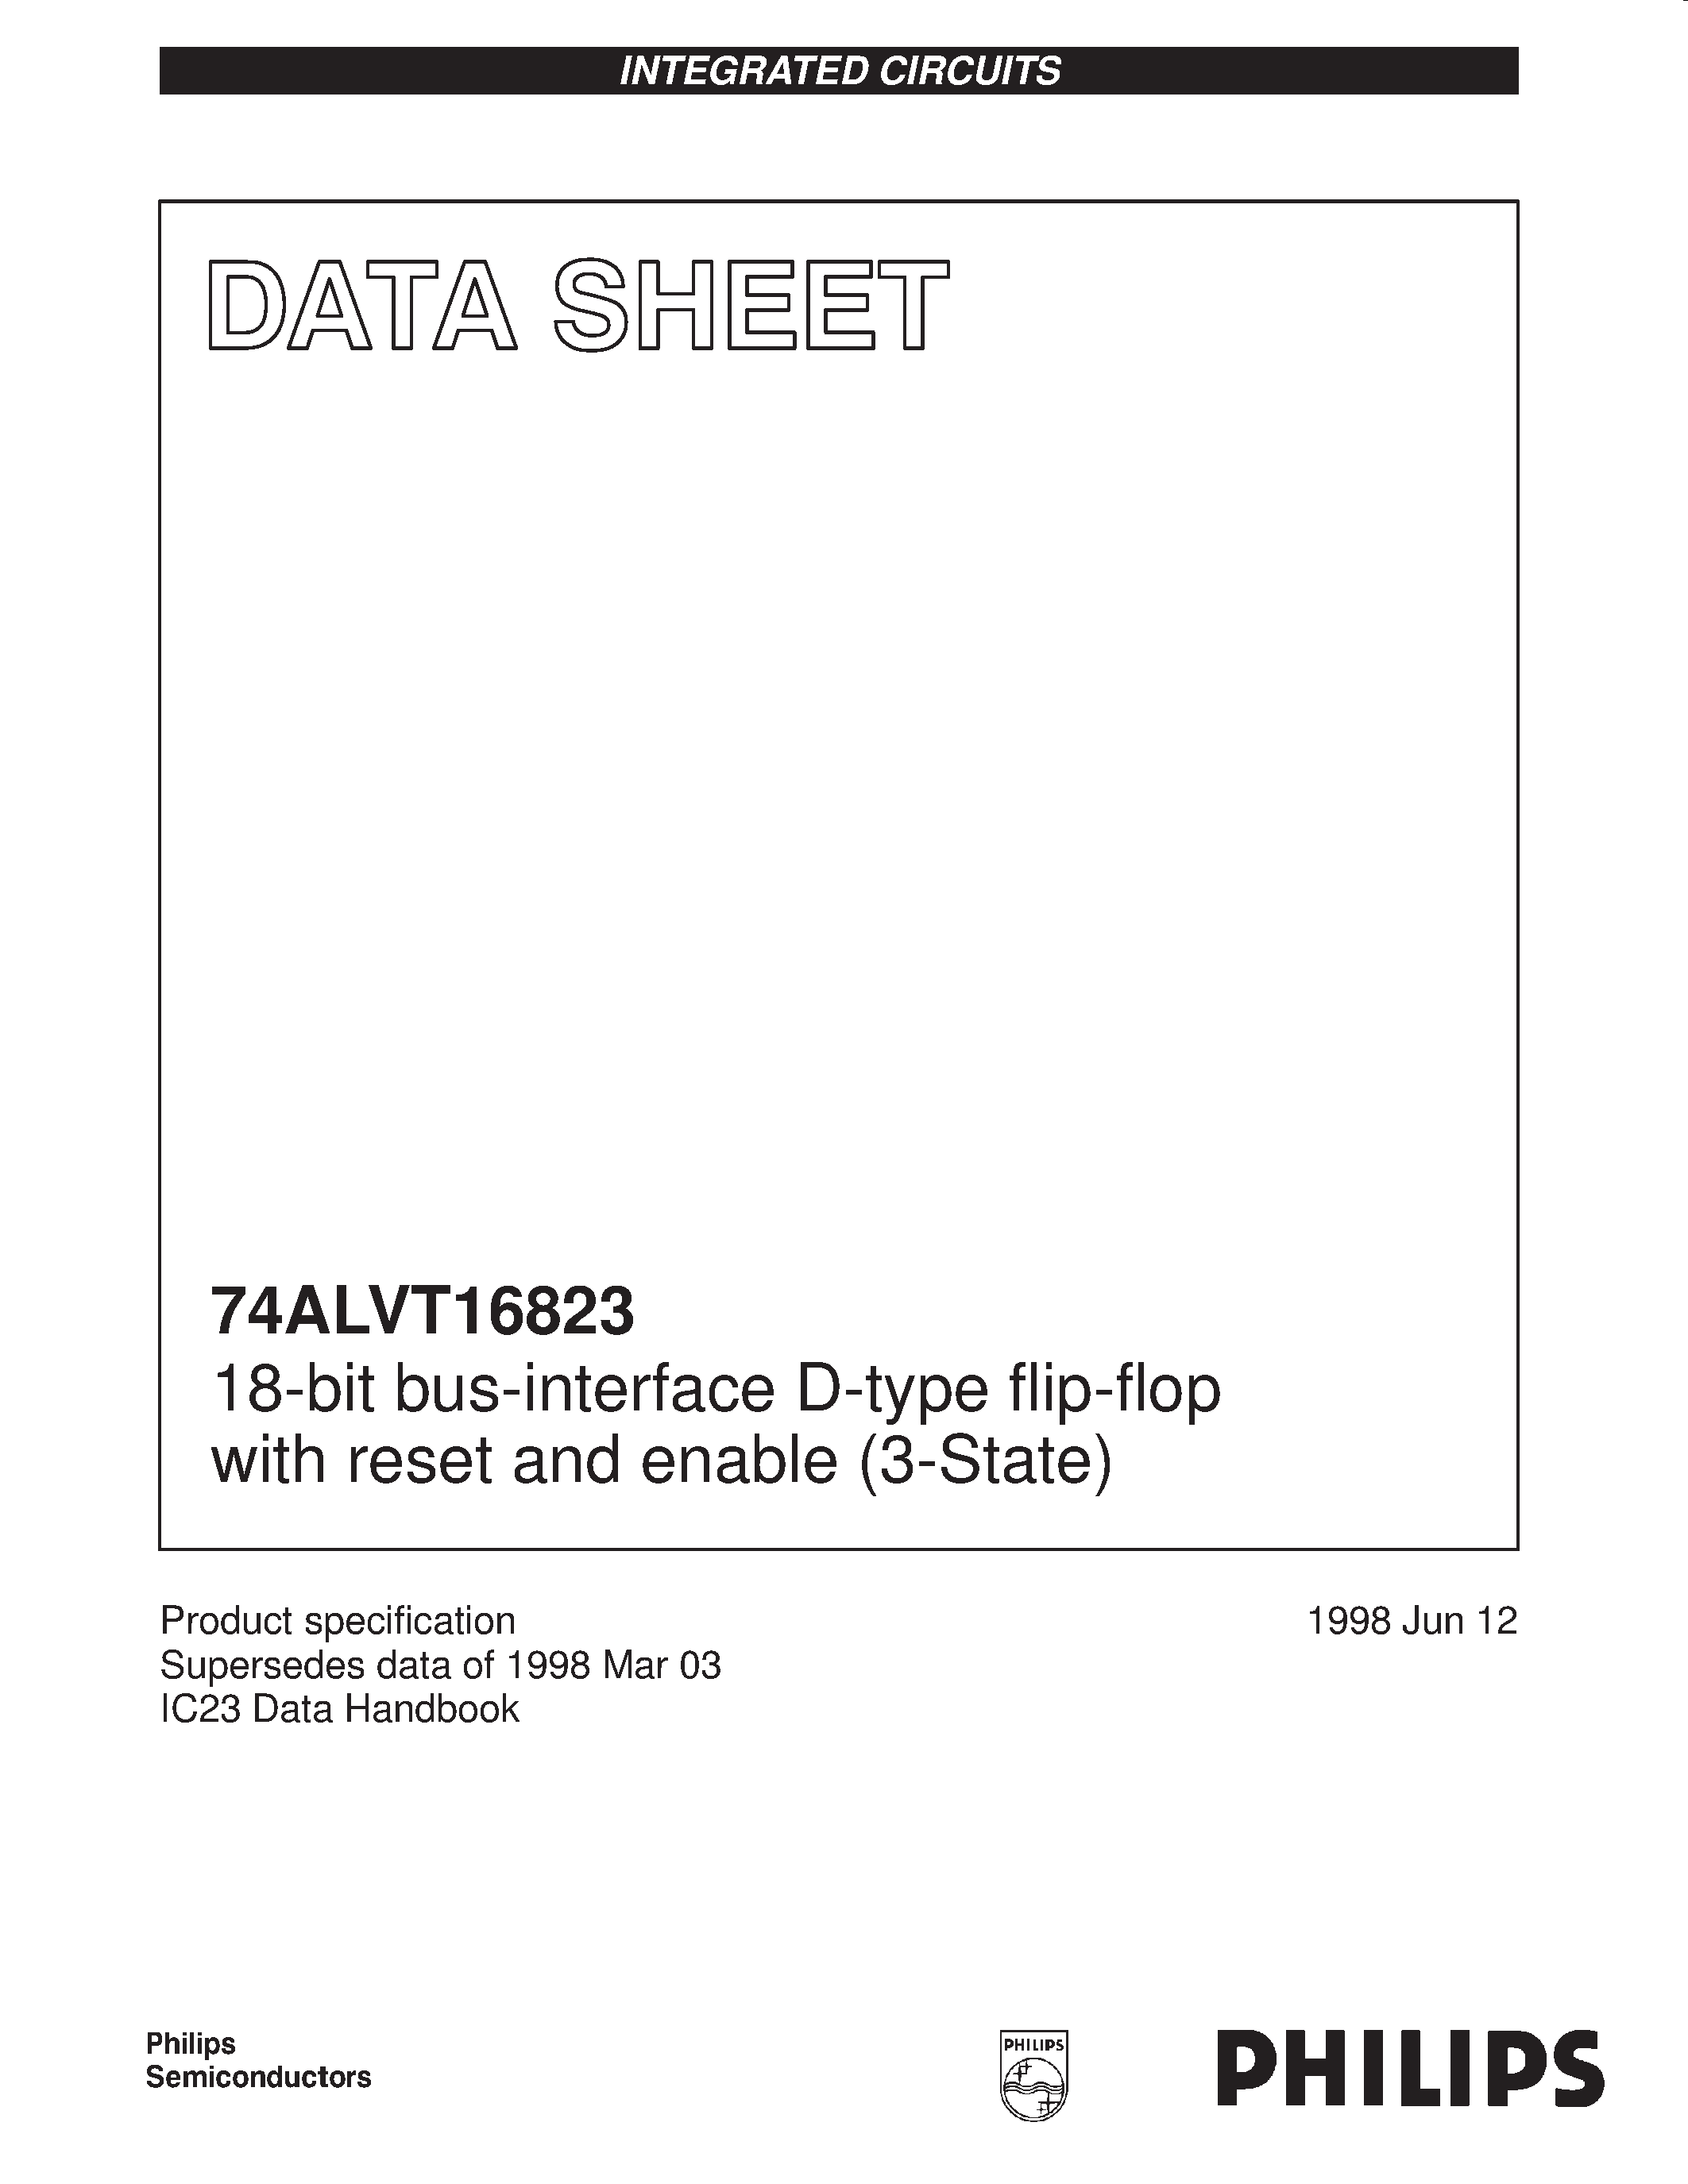 Datasheet 74ALVT16823 - 18-bit bus-interface D-type flip-flop with reset and enable 3-State page 1